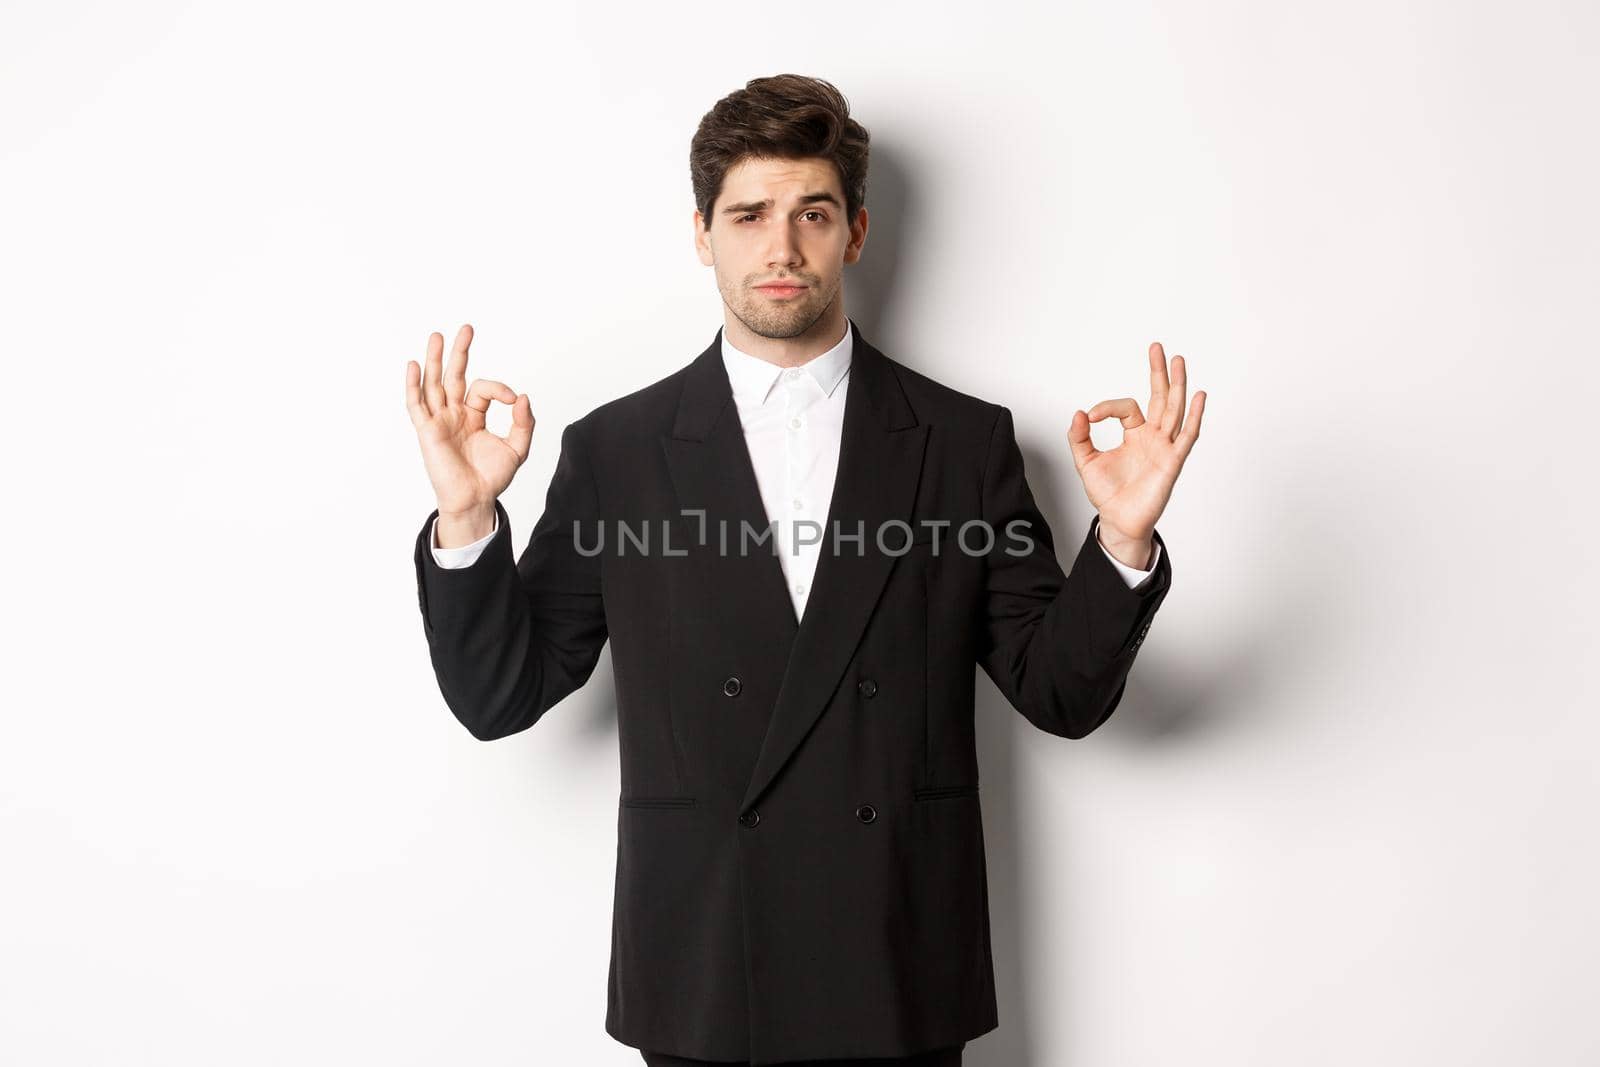 Concept of new year party, celebration and lifestyle. Portrait of confident good-looking man in black suit, showing okay sign and approve something, standing over white background.